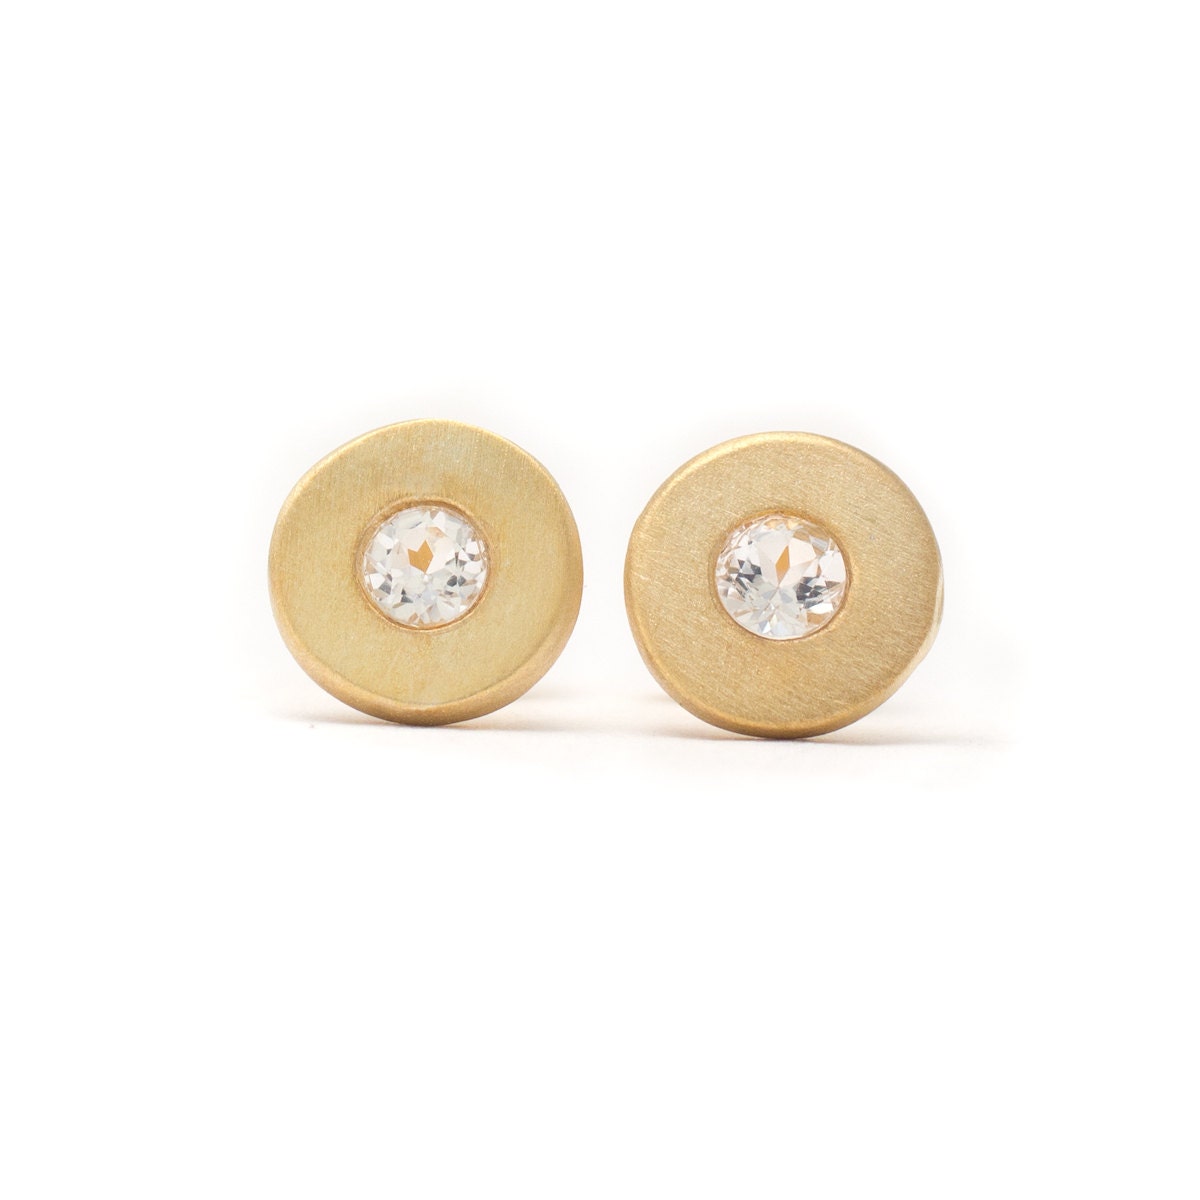 Floating White Topaz Stud Earrings - 18k Gold Vermeil - 7.5mm Round - Gold Disc - Small Studs - Natural Gemstones - kristinelily